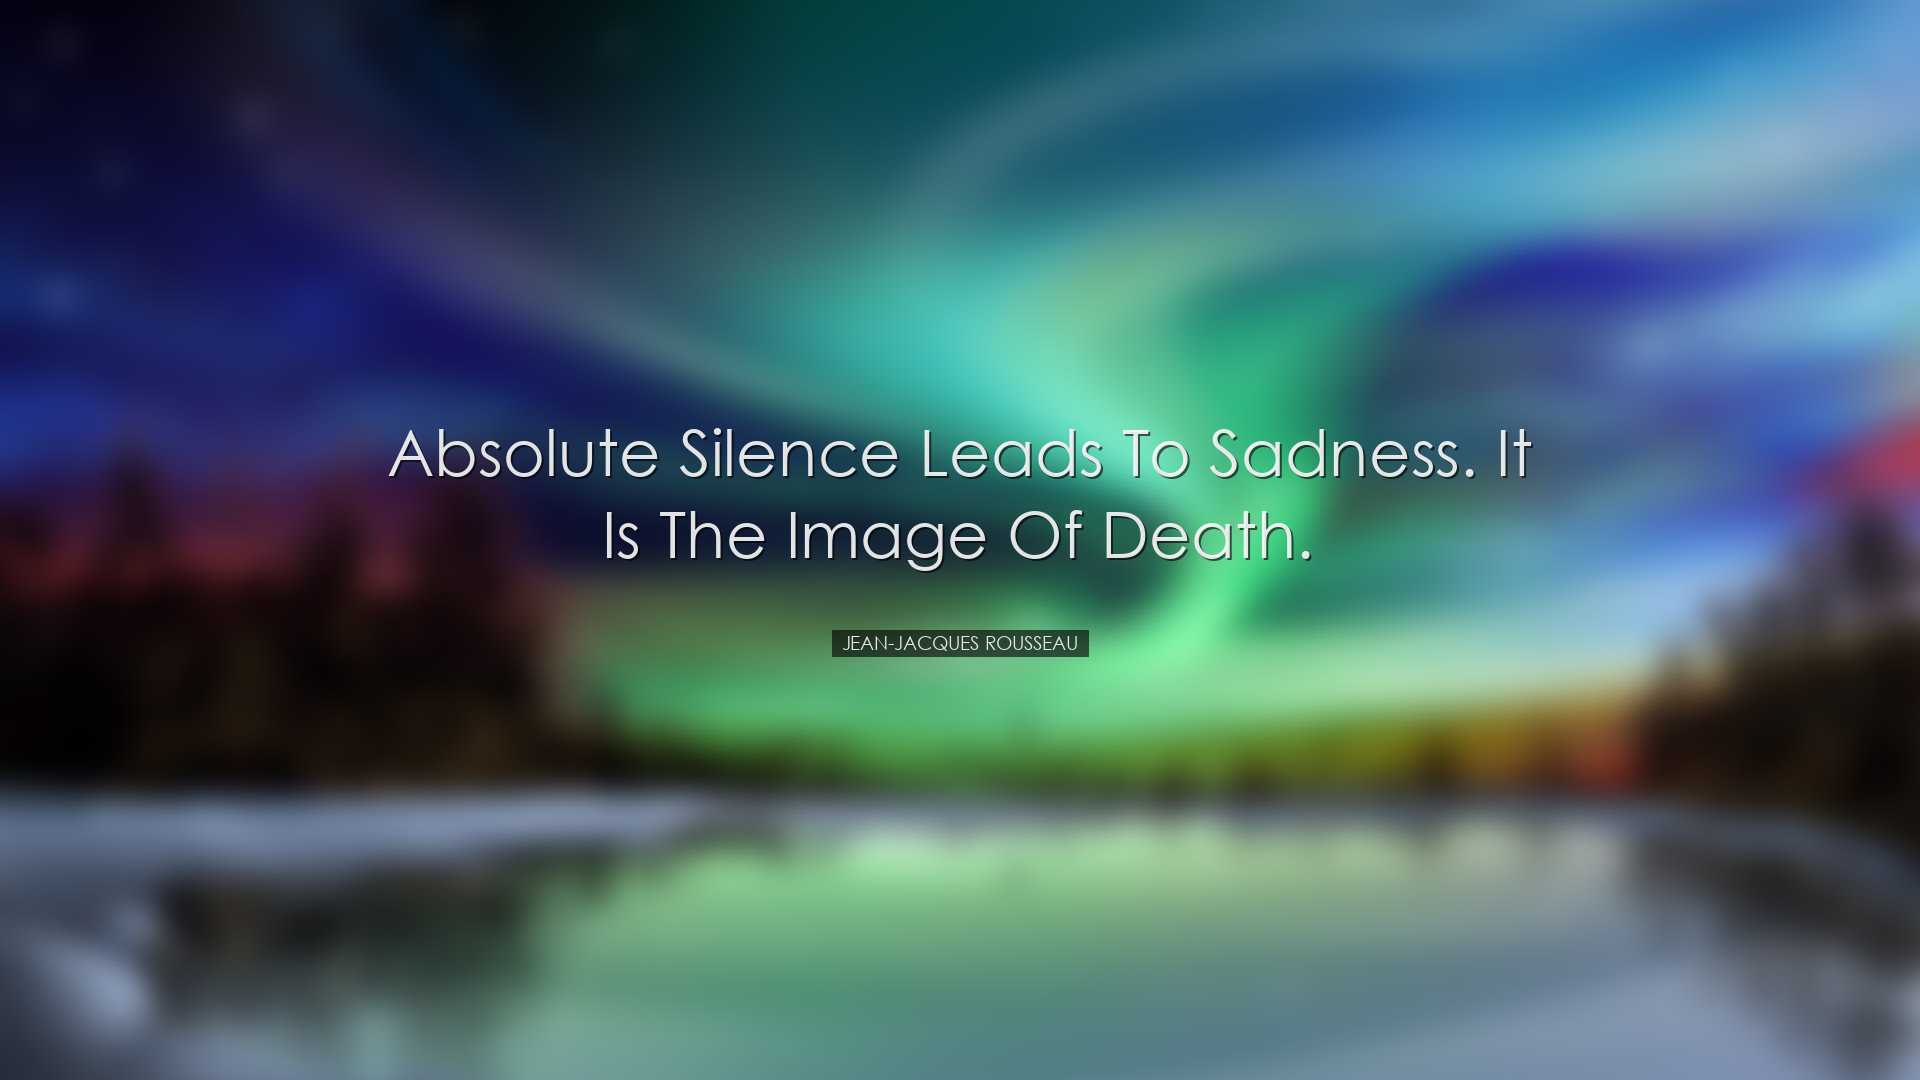 Absolute silence leads to sadness. It is the image of death. - Jea